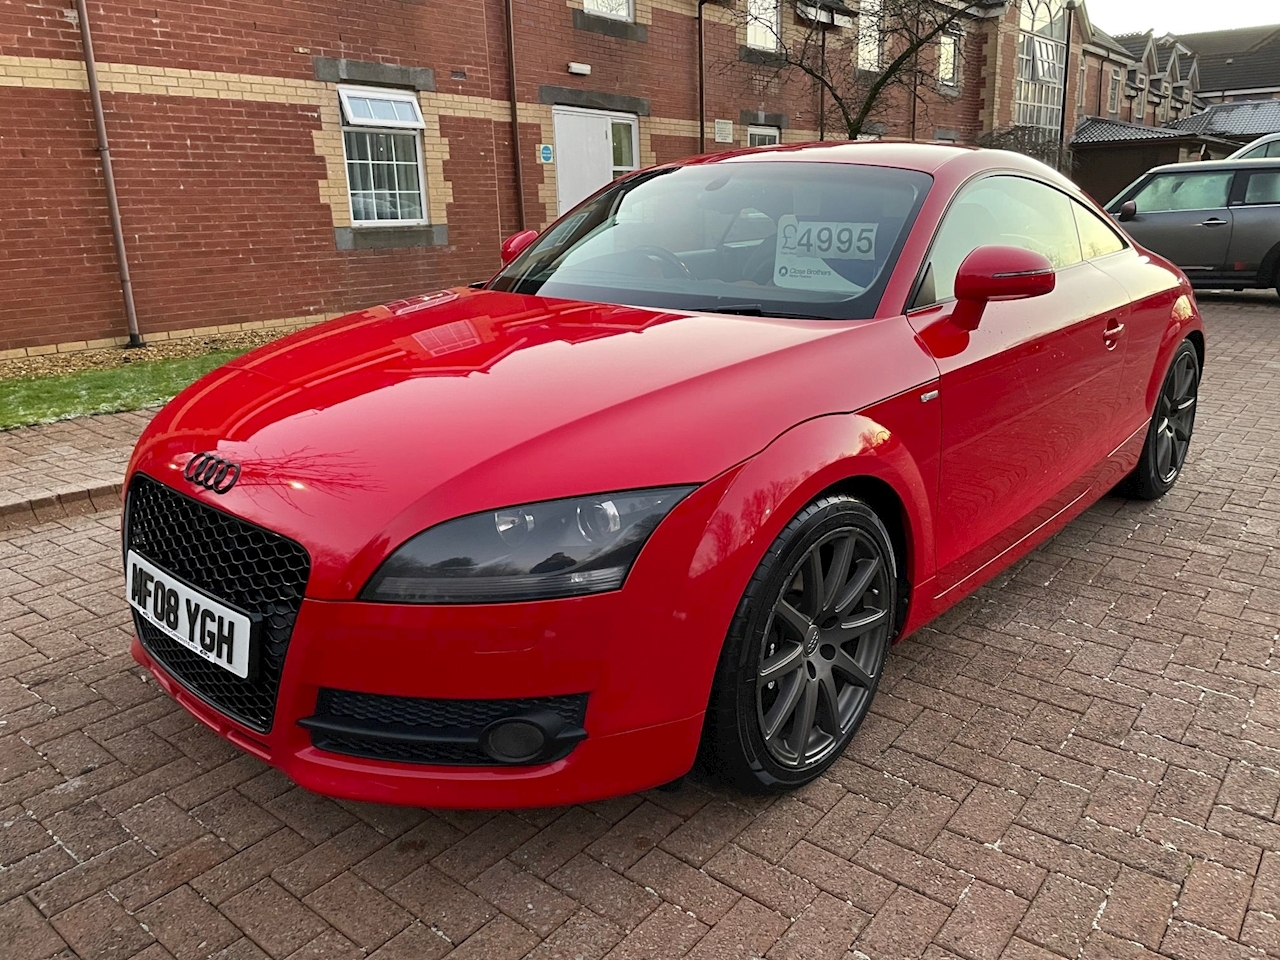 2.0 TFSI Coupe 3dr Petrol Manual (Exclusive Line) (183 g/km, 197 bhp)